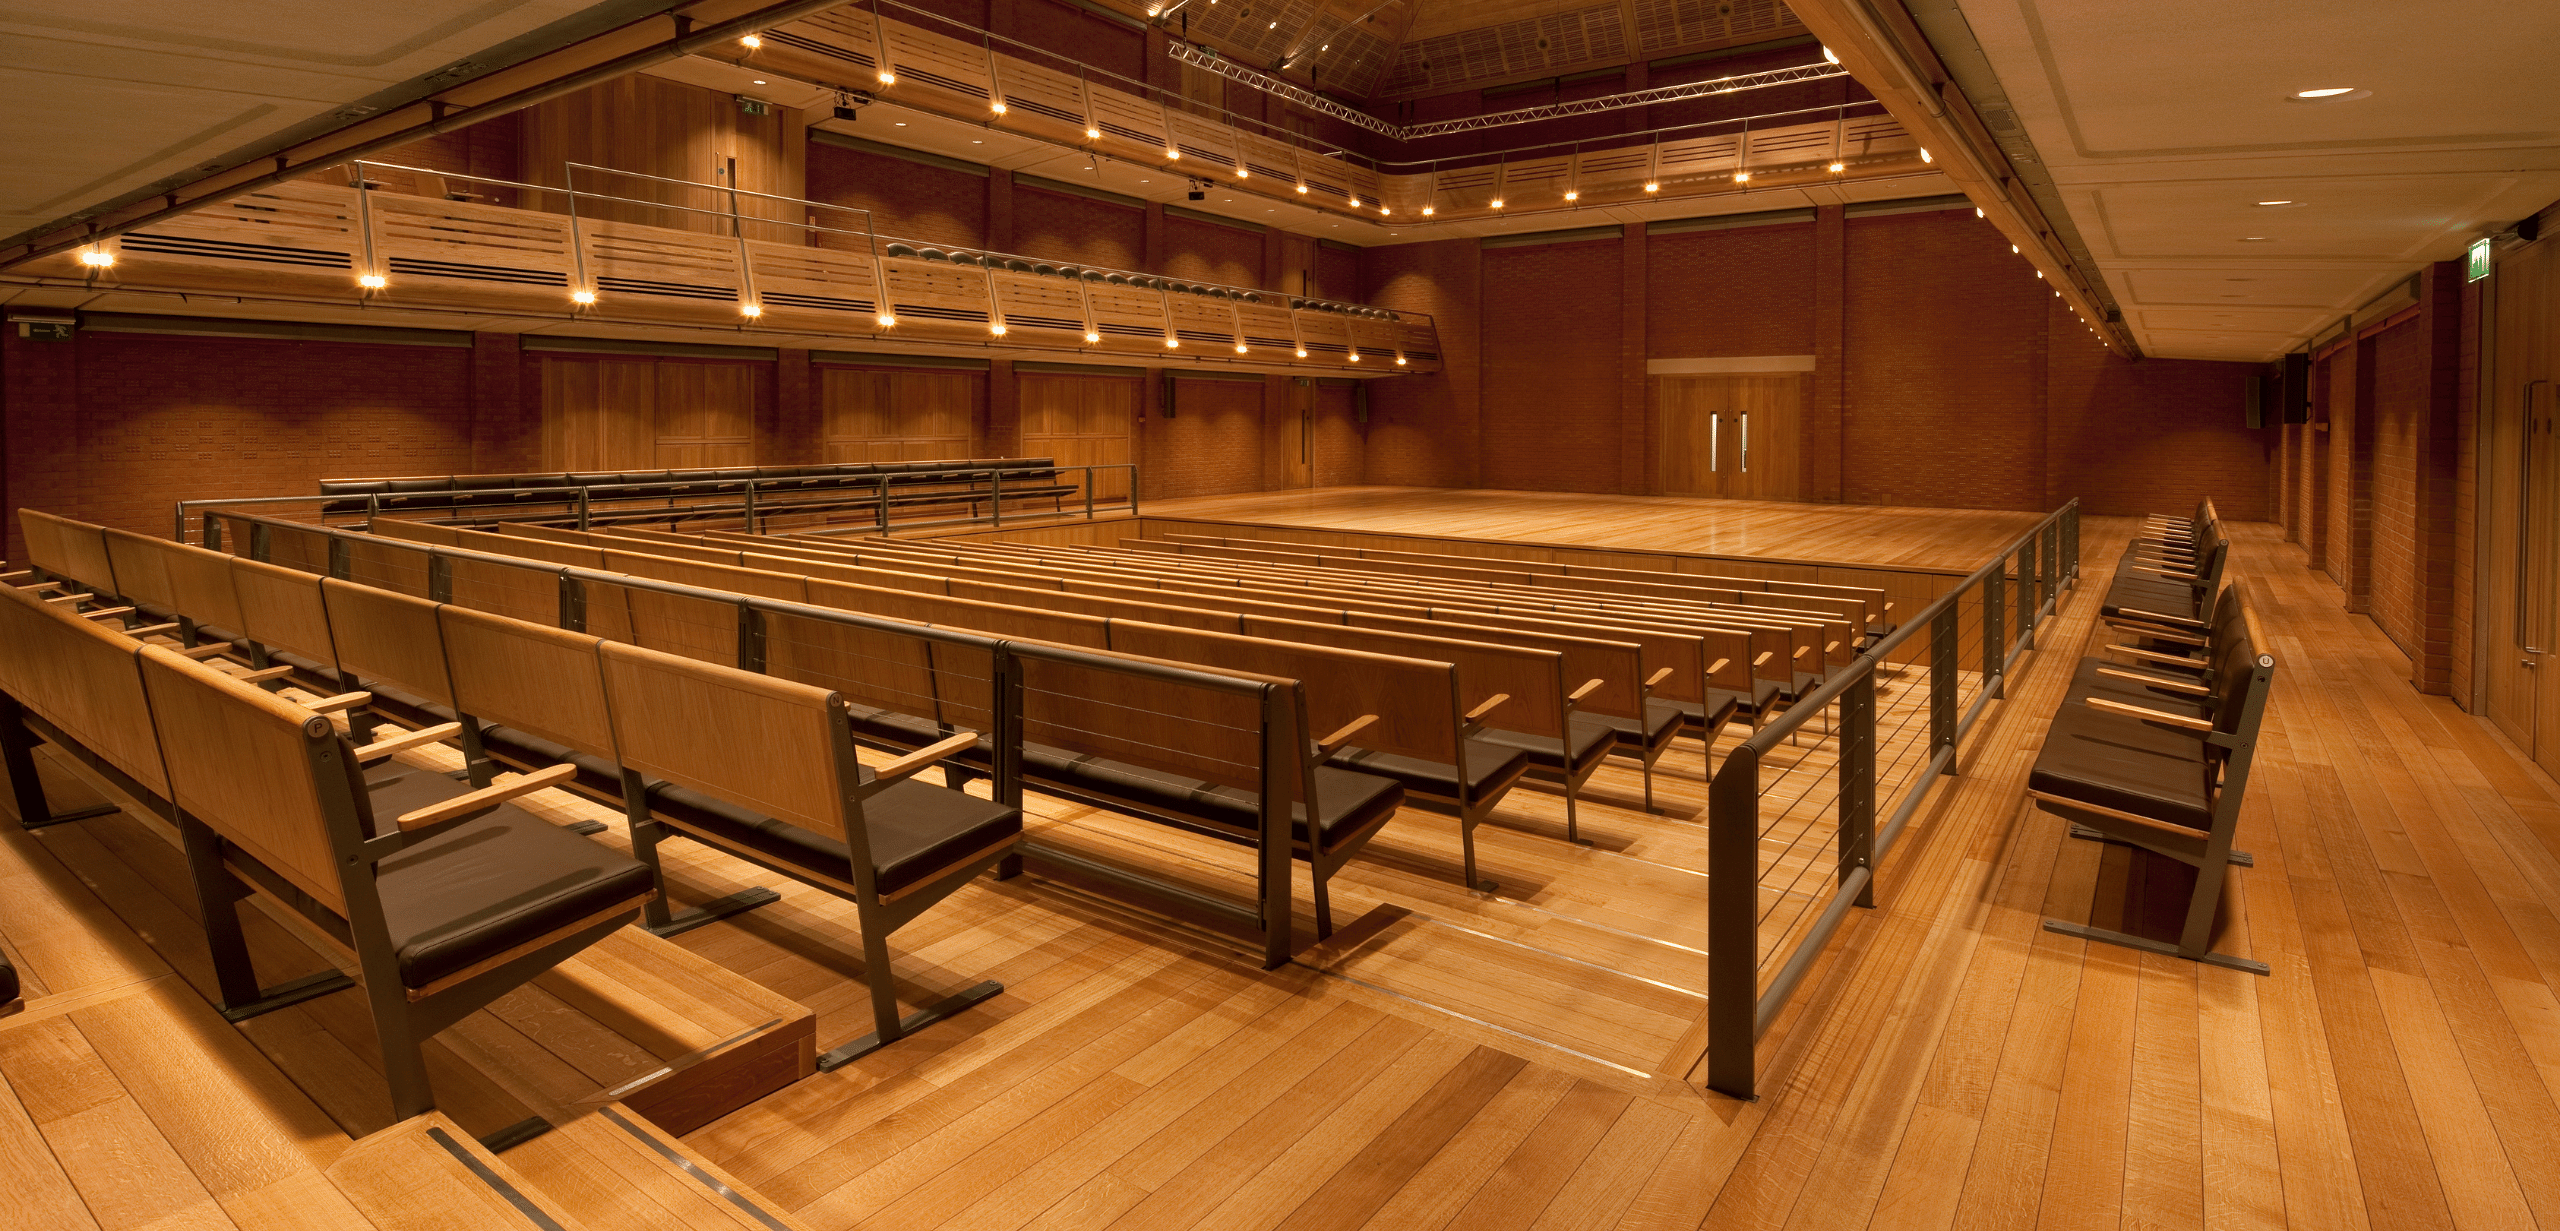 A large auditorium with rows of theater style seating